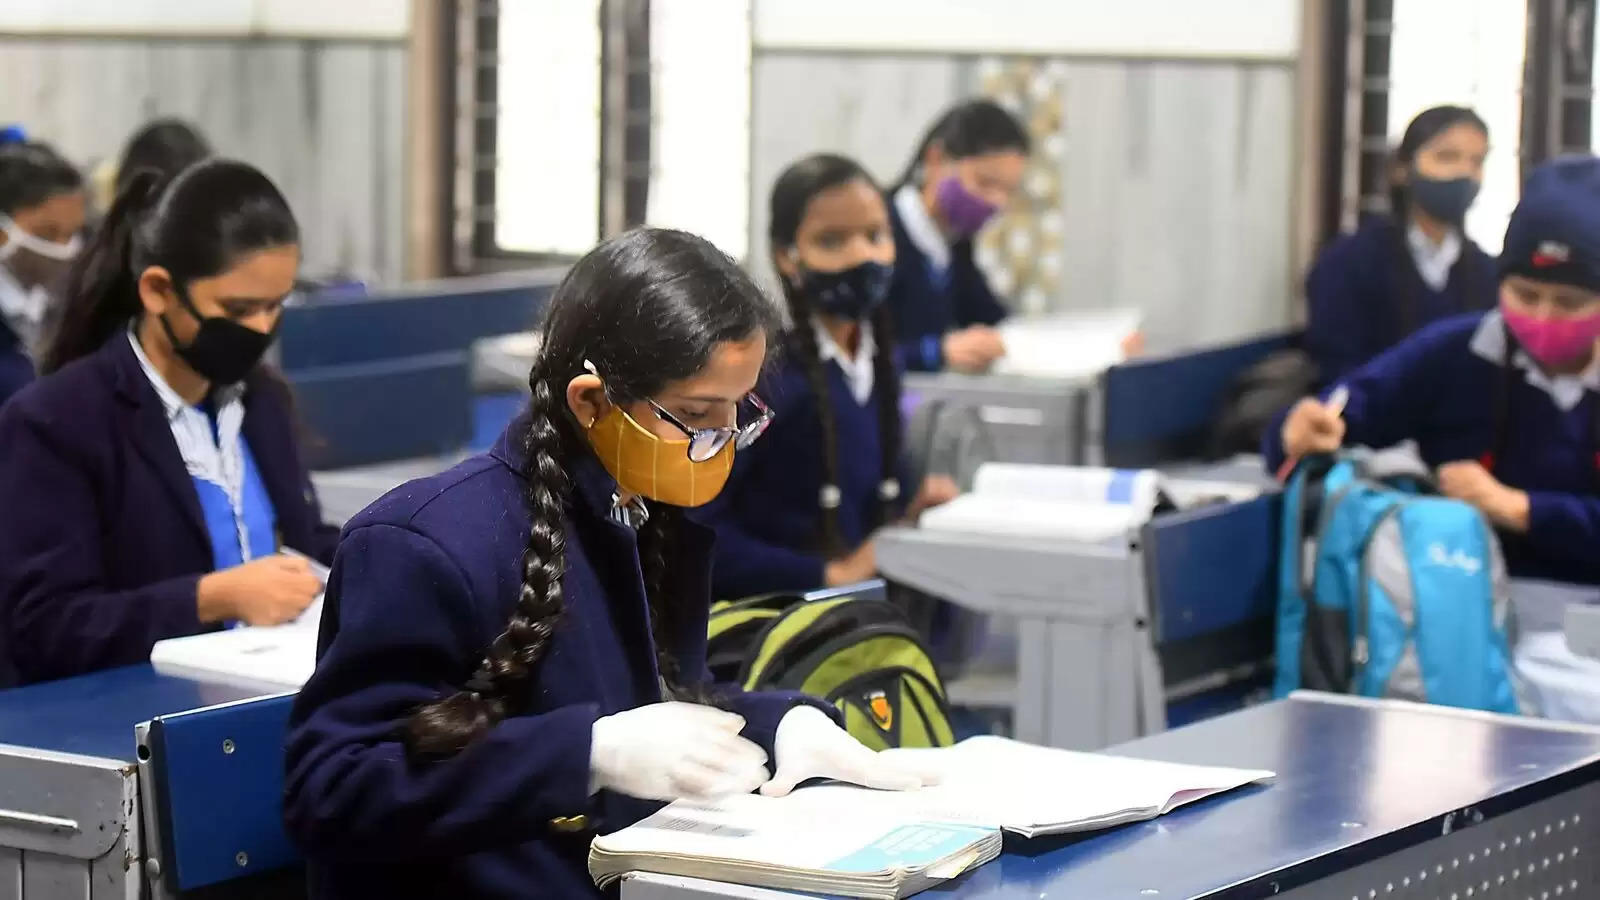 CBSE Board Exam 2024: Application Window for Private Candidates to Close Today